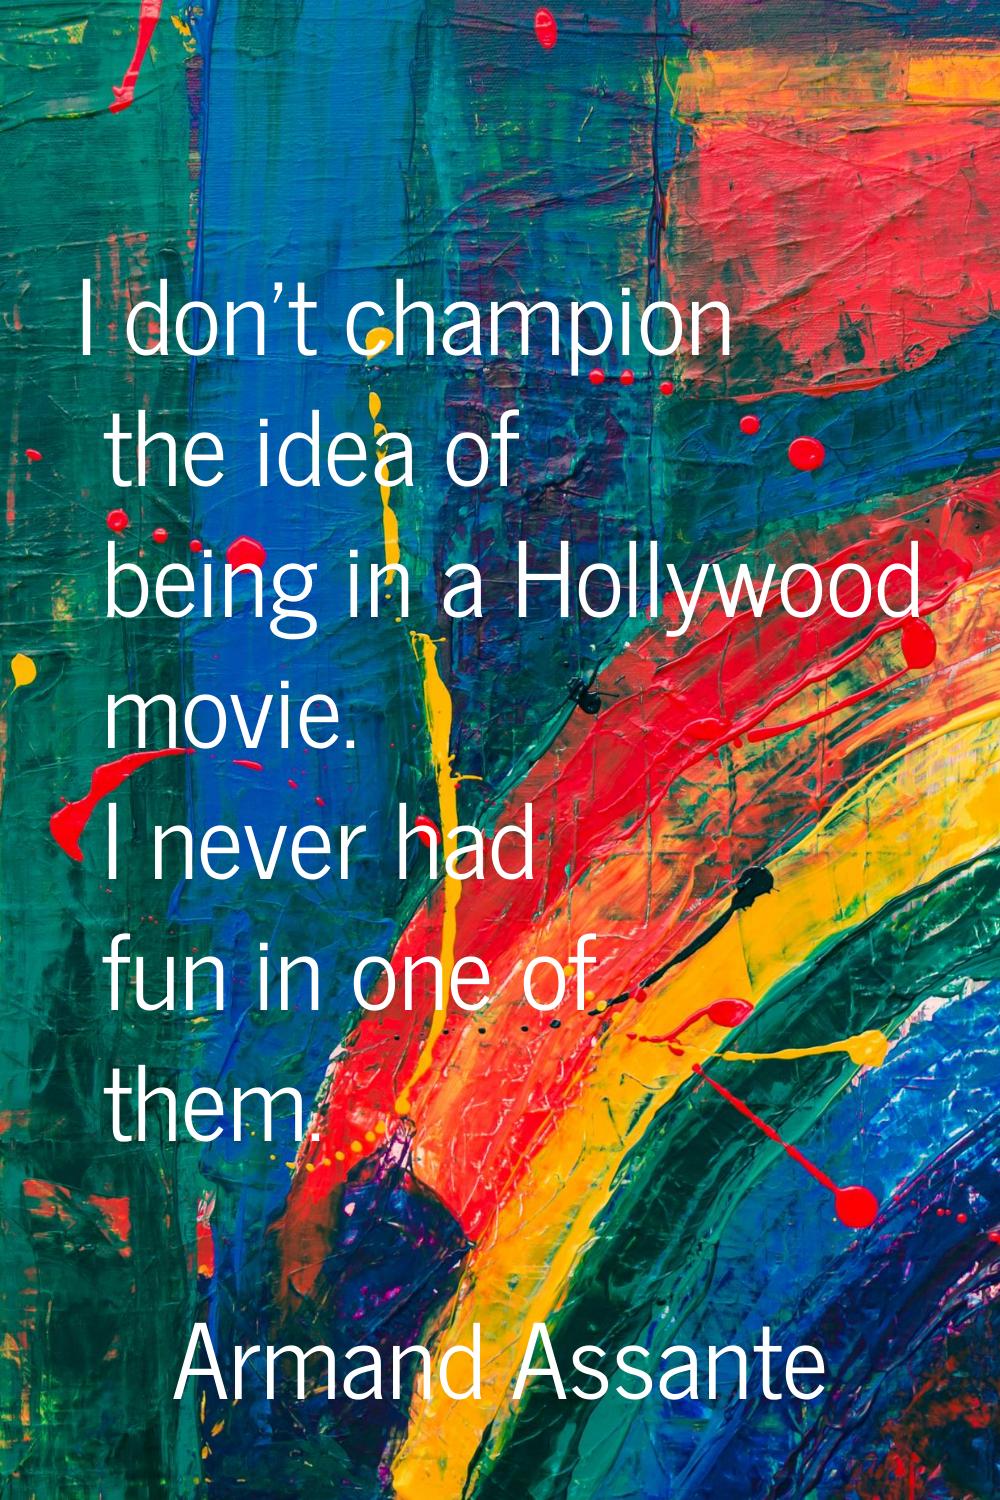 I don't champion the idea of being in a Hollywood movie. I never had fun in one of them.